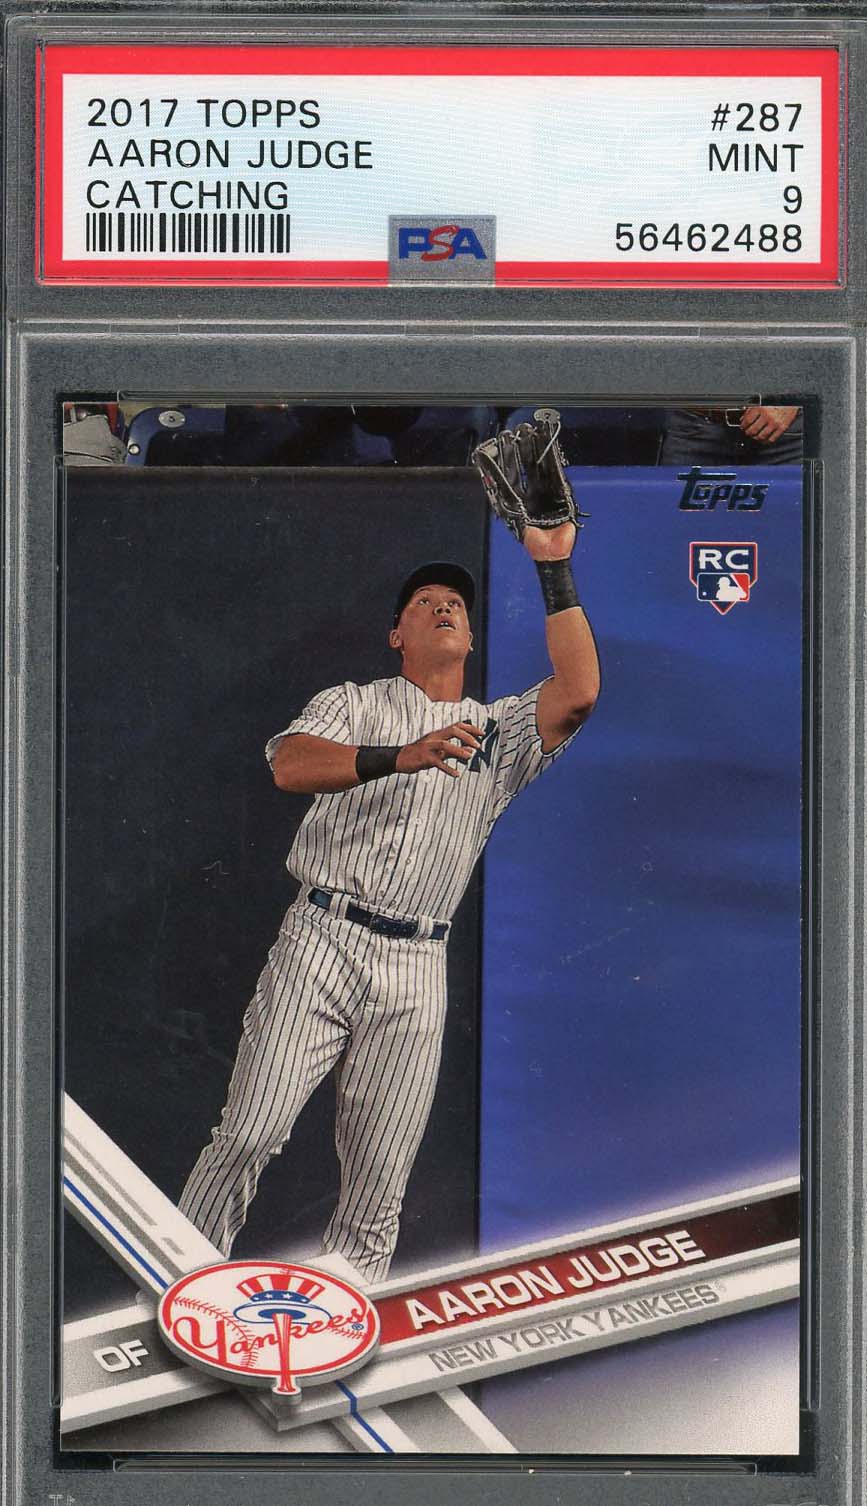 Aaron Judge 2017 Topps Catching Baseball Rookie Card RC #287 Graded PS